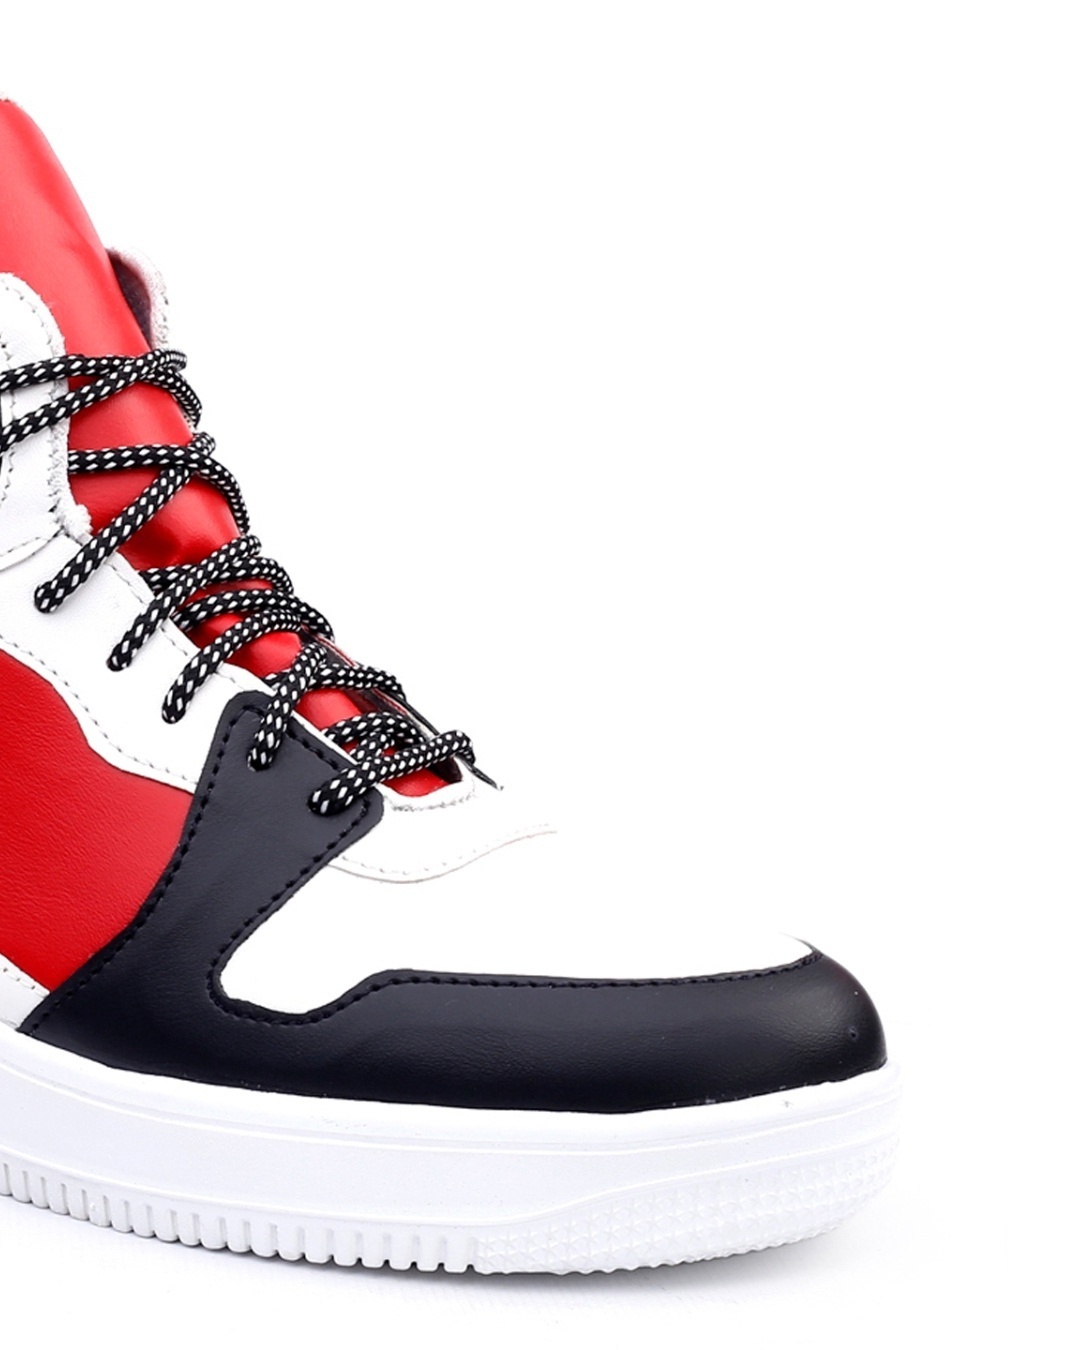 Shop Men's Red and White Color Block Casual Shoes